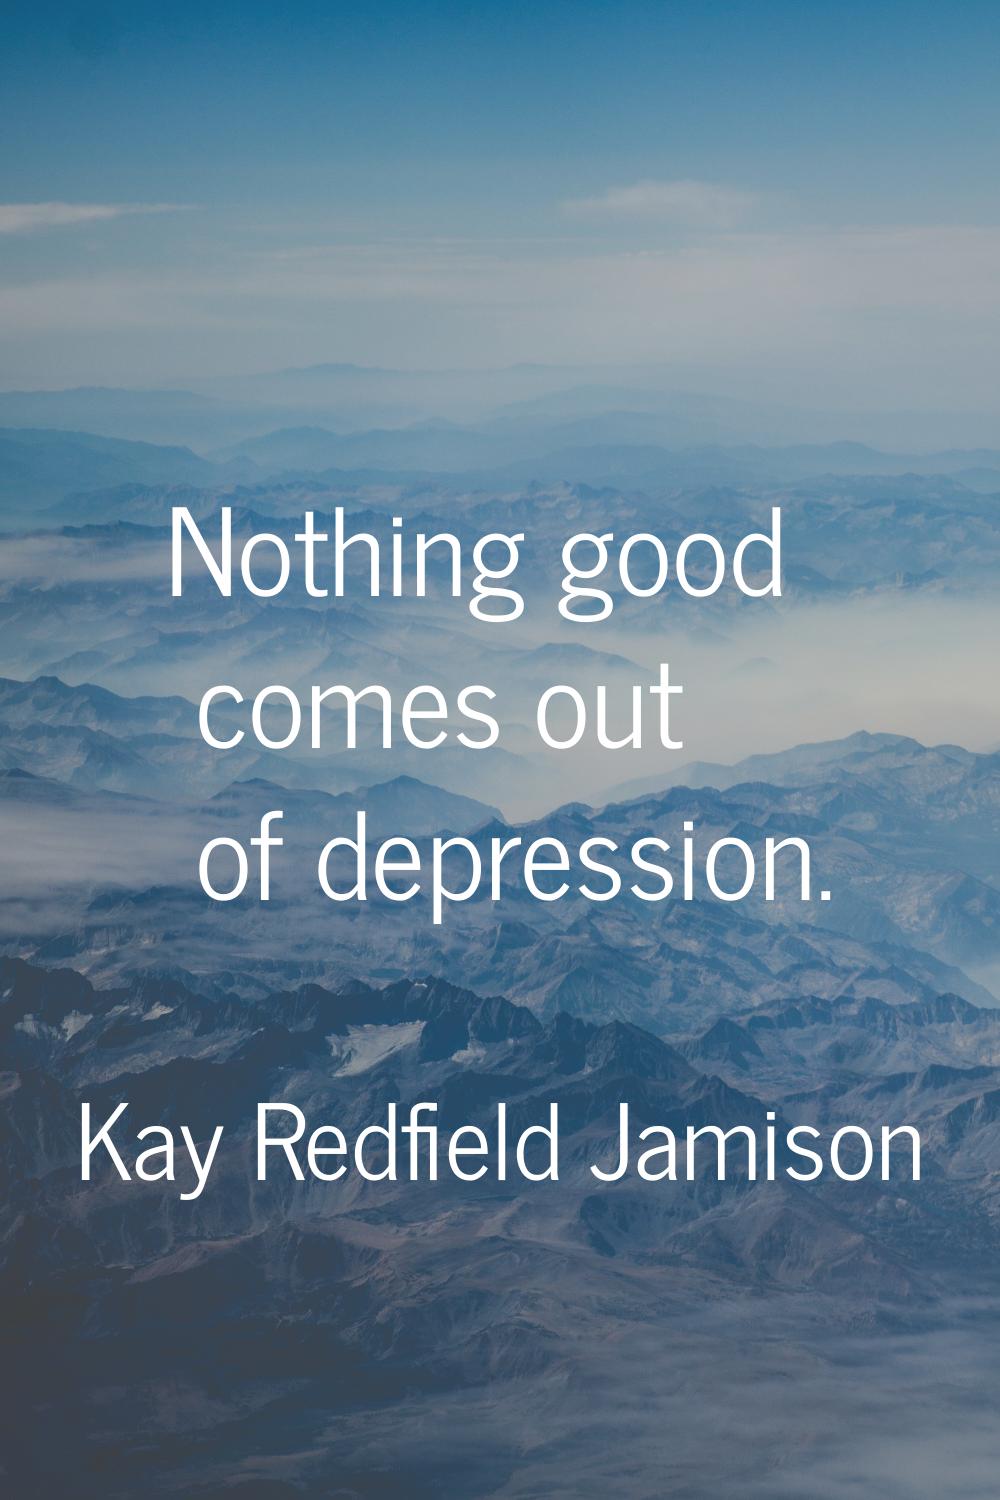 Nothing good comes out of depression.